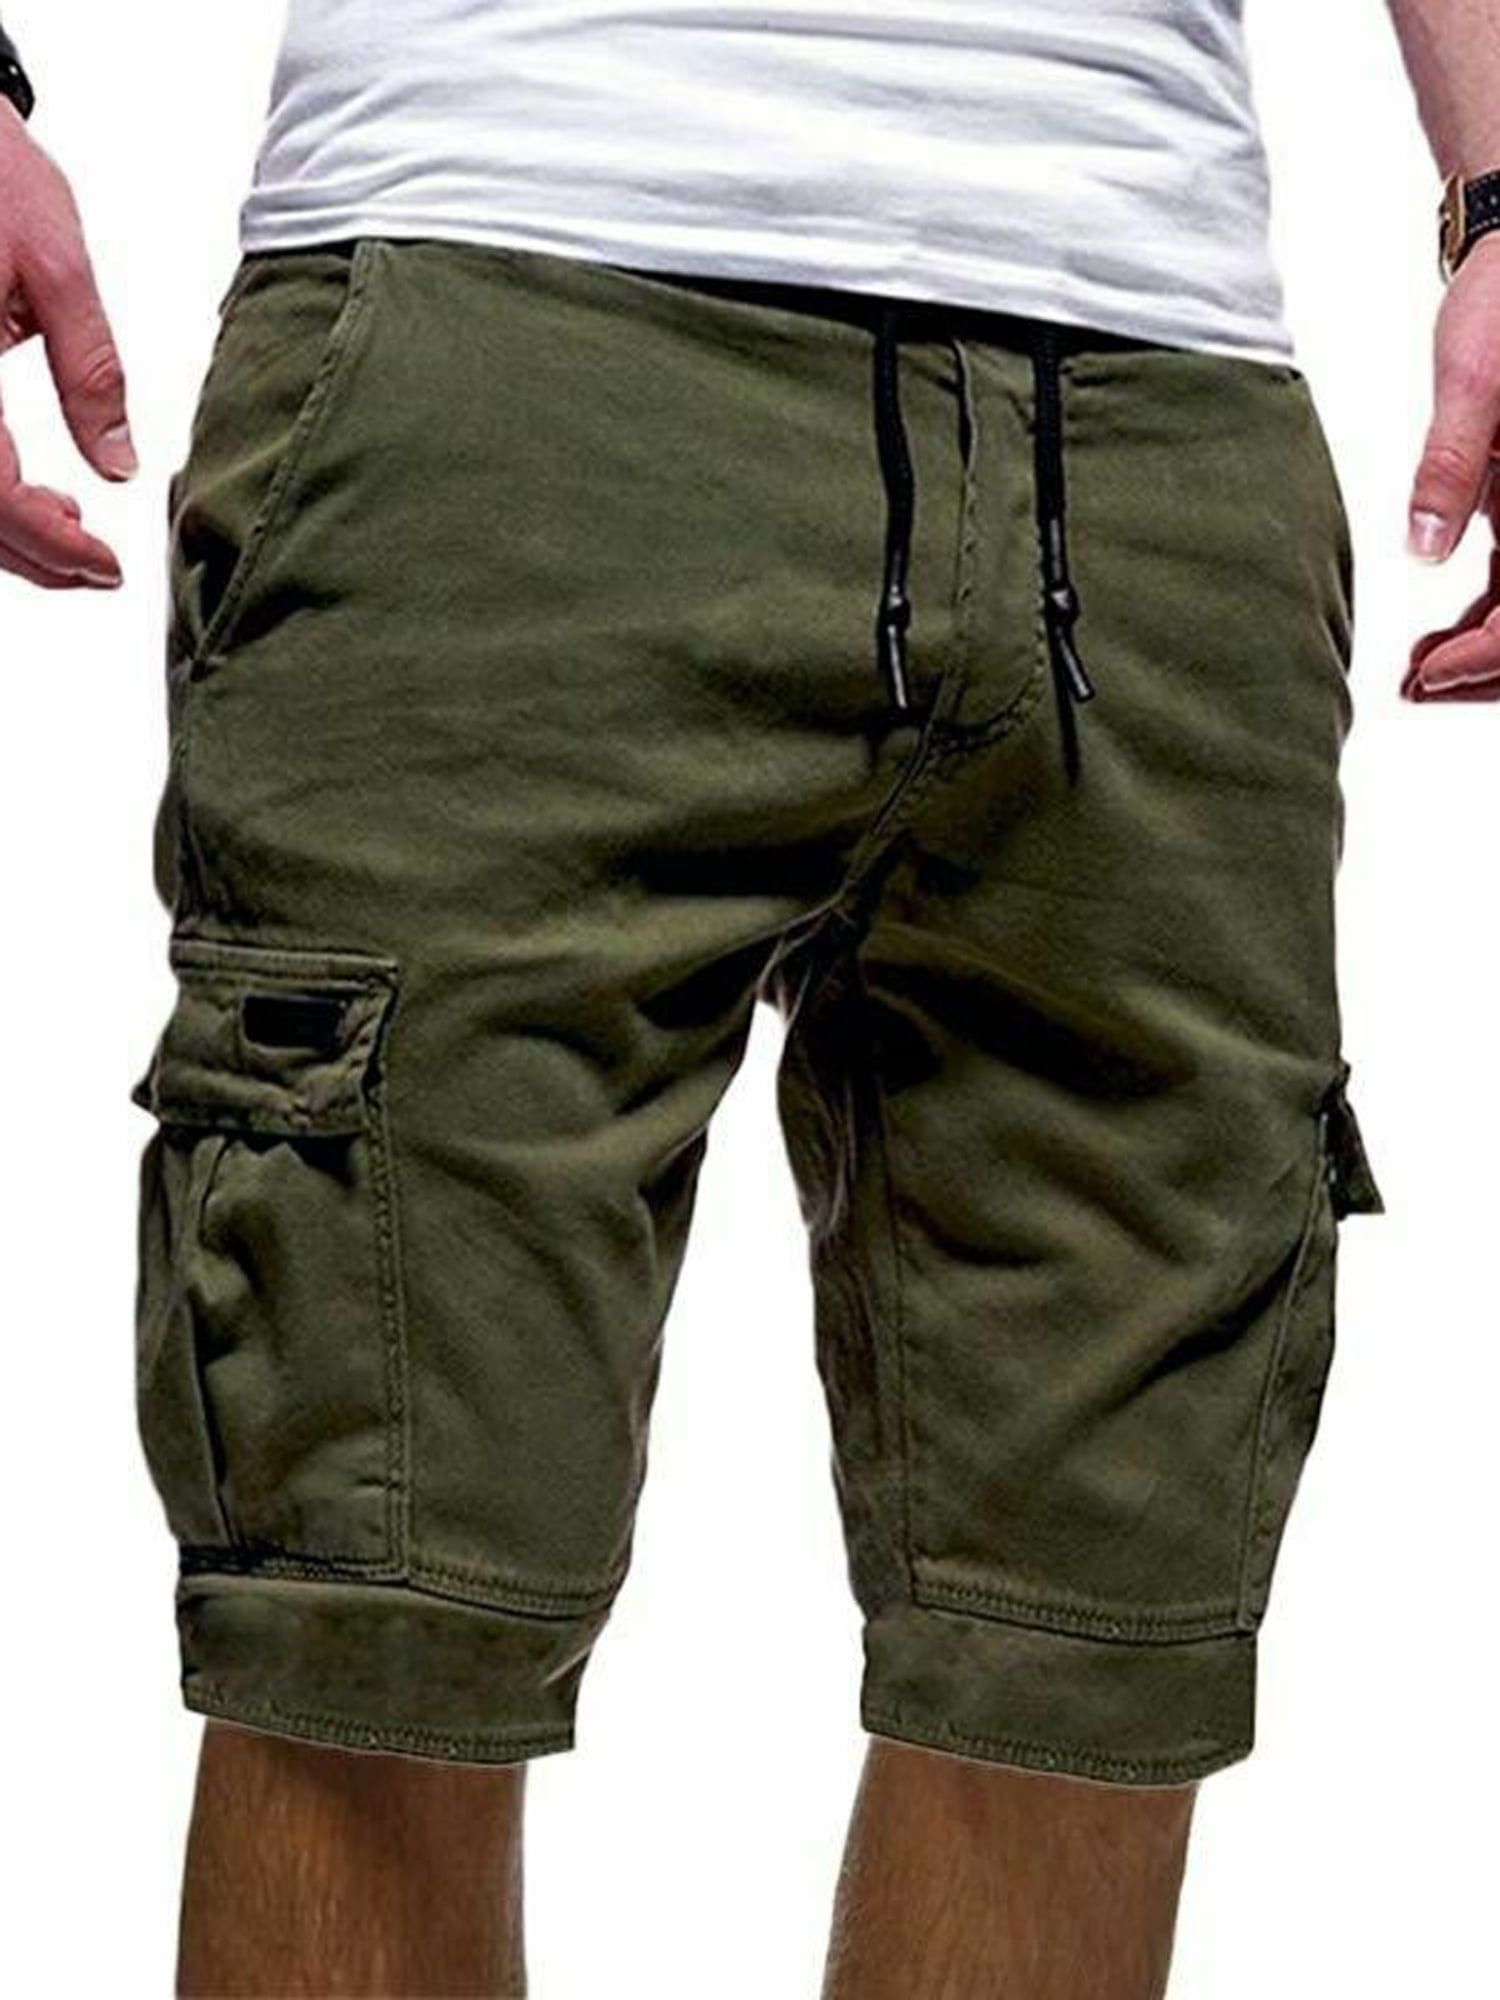 Mens Shorts Casual Cotton Workout Gym Elastic Waist Pants Drawstring with Pocket 